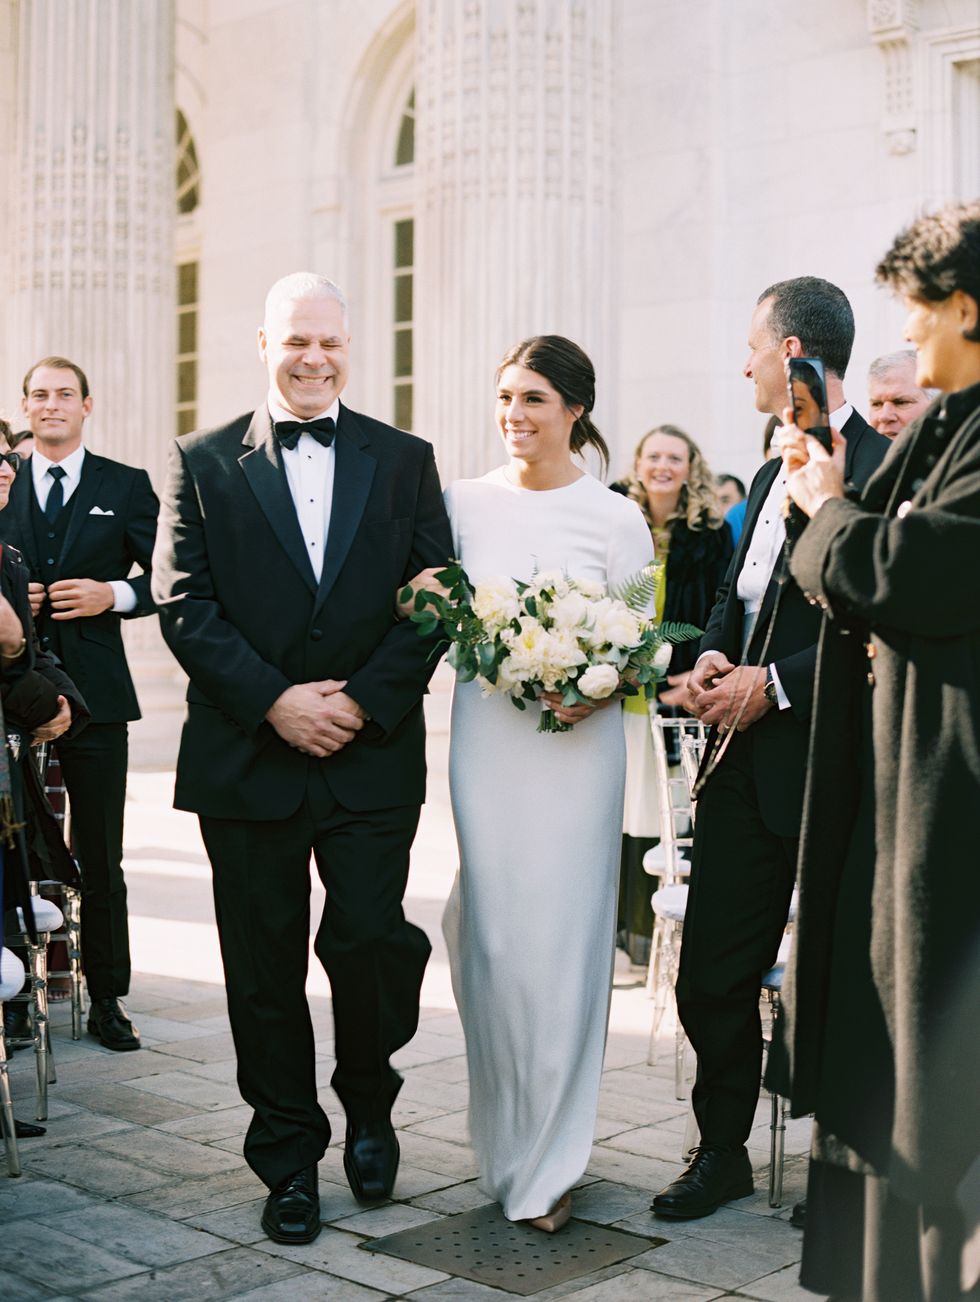 <p>Arielle's father walked her down the aisle as a string quartet played "Samskeyti" by Sigur Rós.</p>